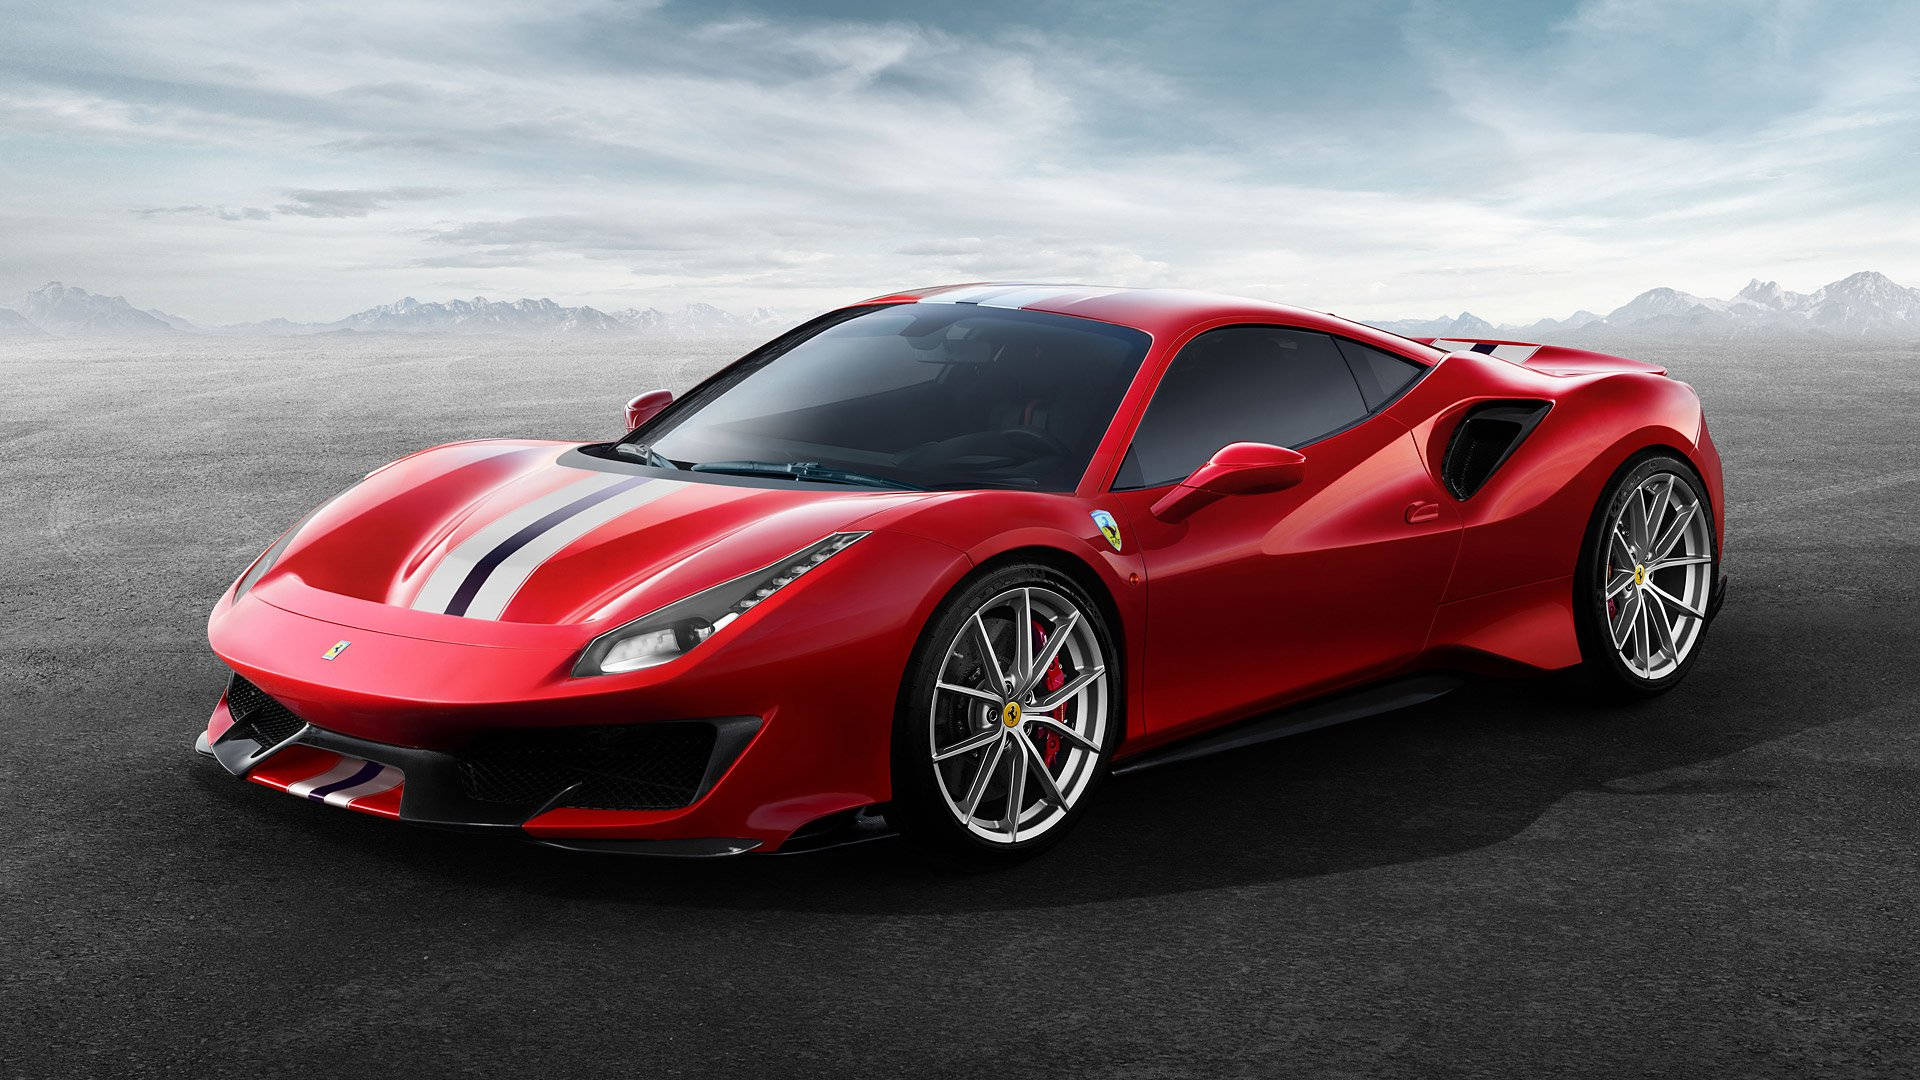 Feel the power behind the wheel with a Ferrari Wallpaper